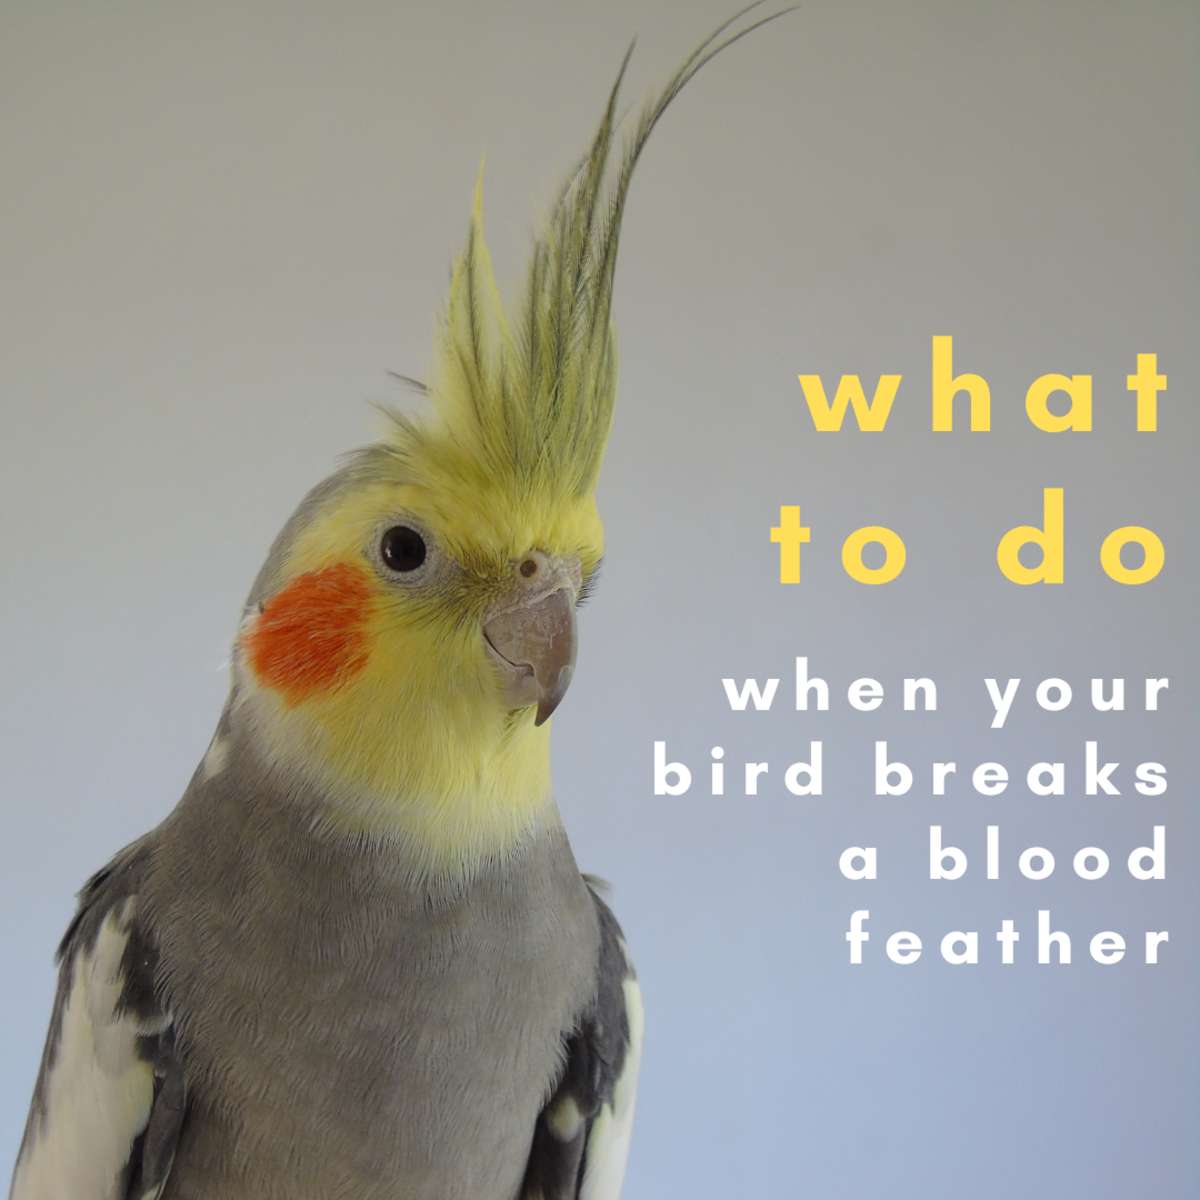 A broken blood feather is no joke. Learn how to identify one and what to do about it. 